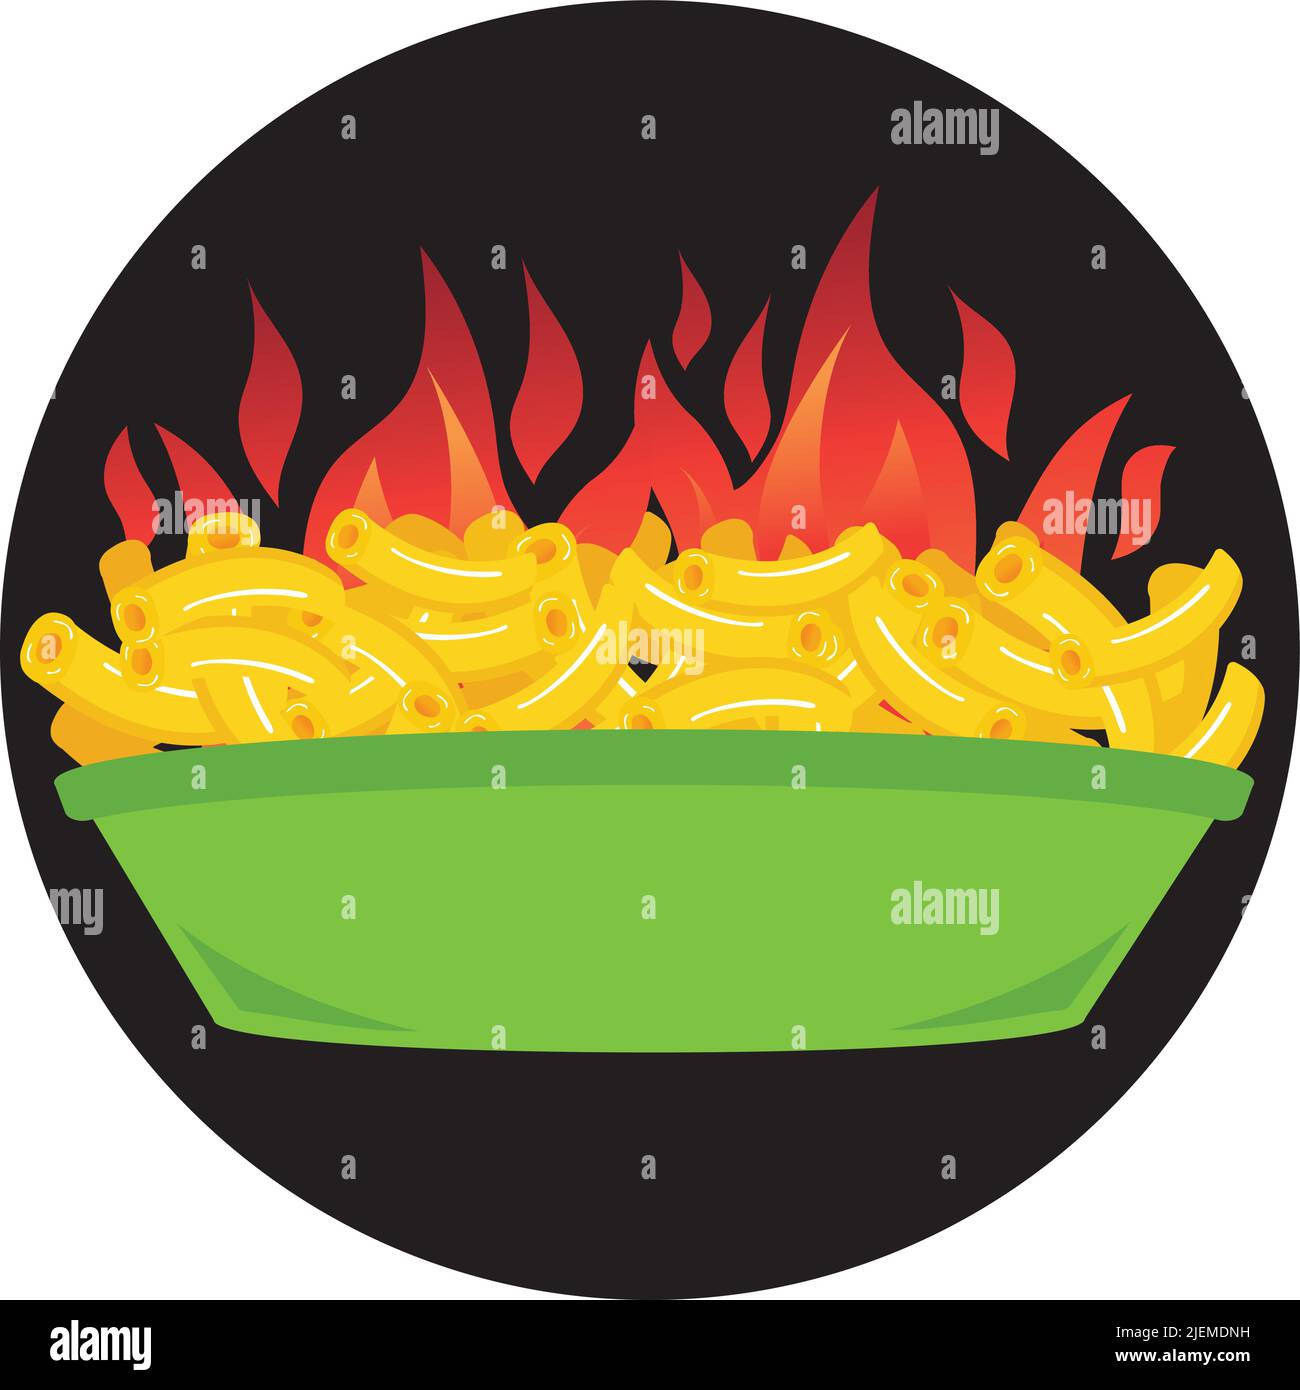 delicious dish of spicy mac and cheese bowl vector illustration with flames Stock Vector